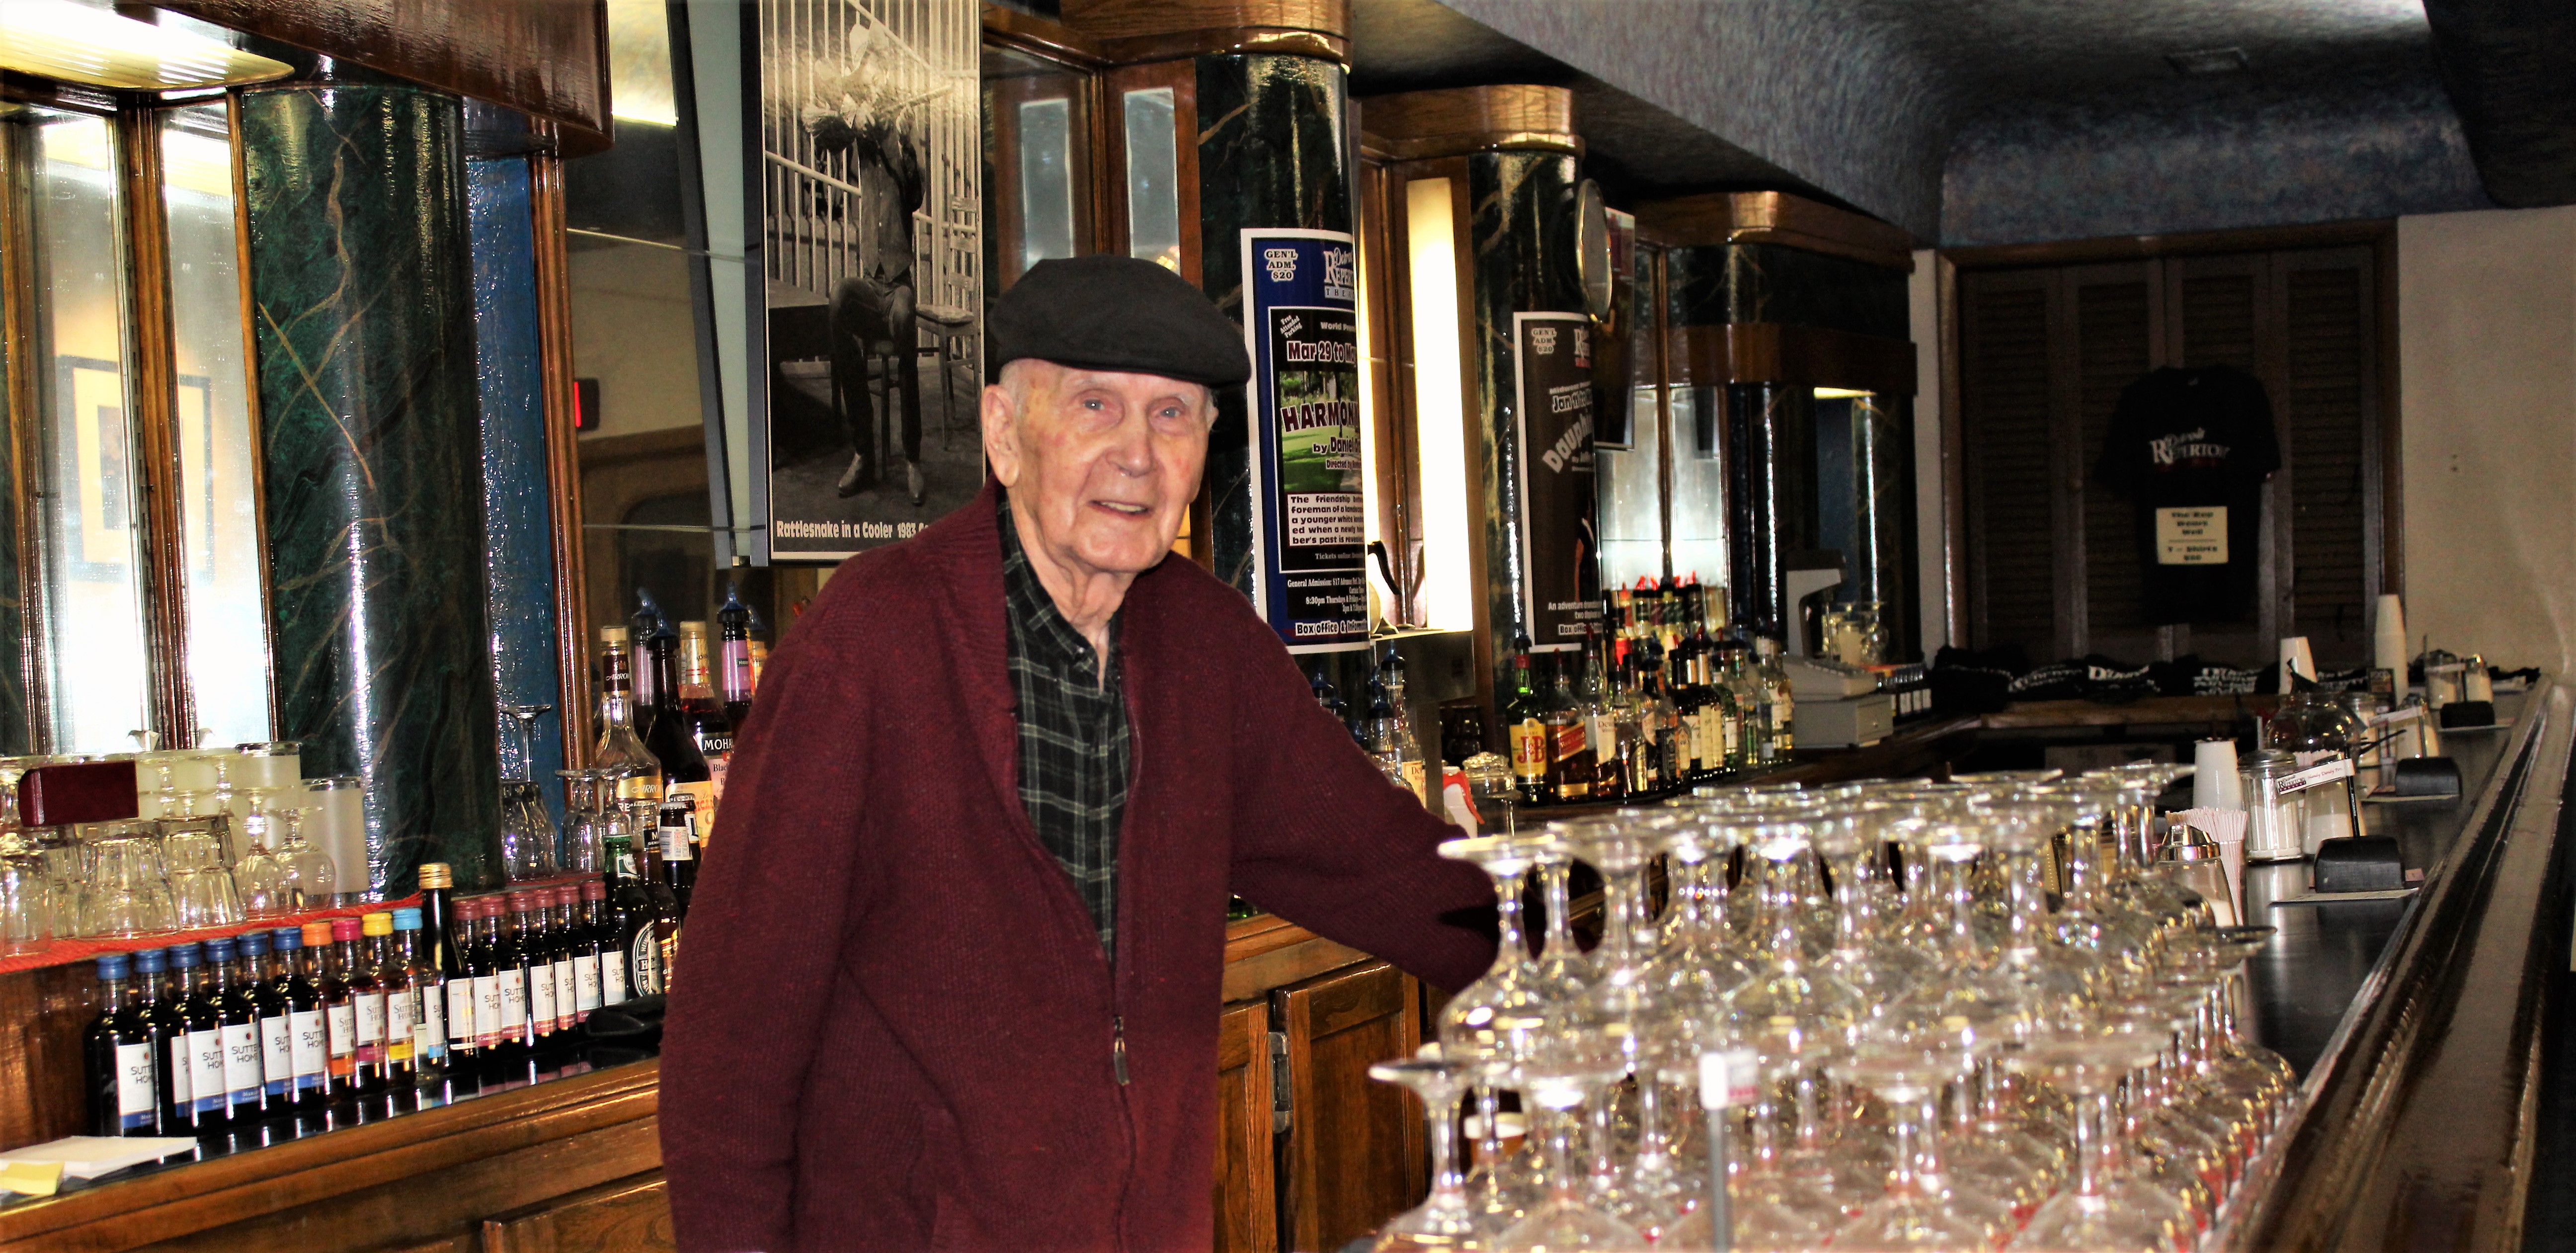 Bruce Millan behind the iconic bar at the Detroit Repertory Theatre photo by sarah williams